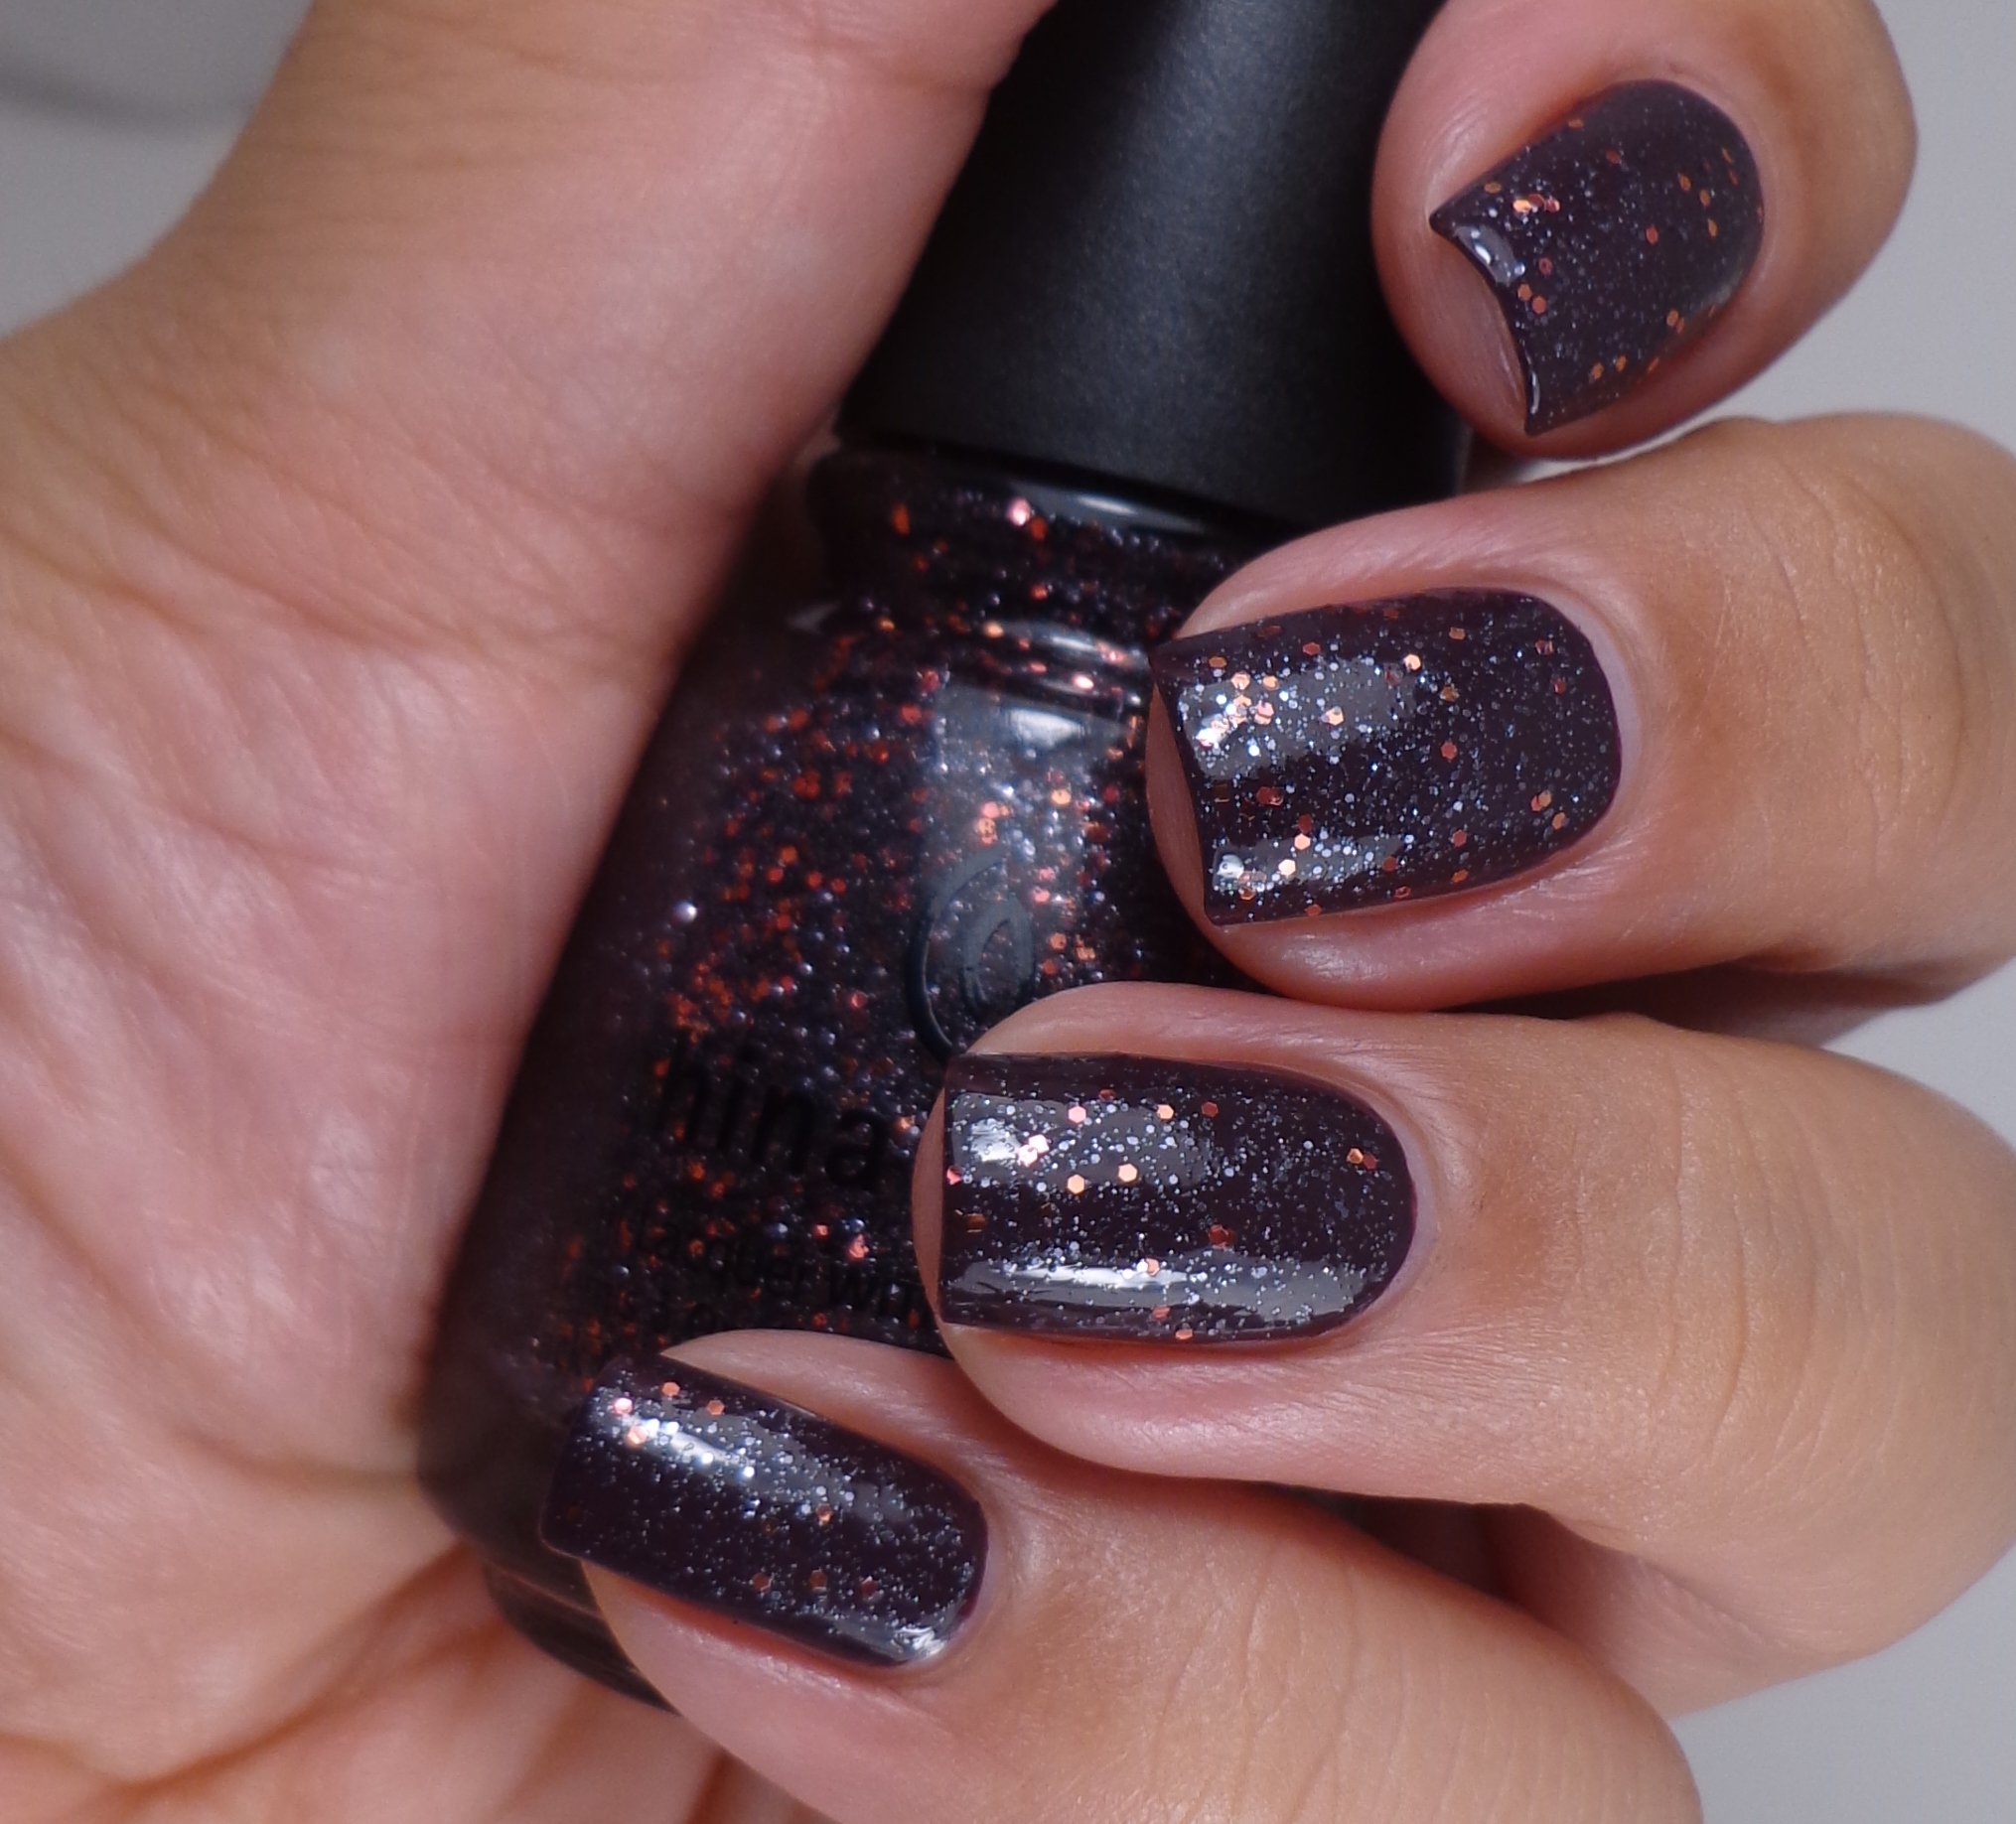 China Glaze Loco-motive 2 over What Are You A-freight Of